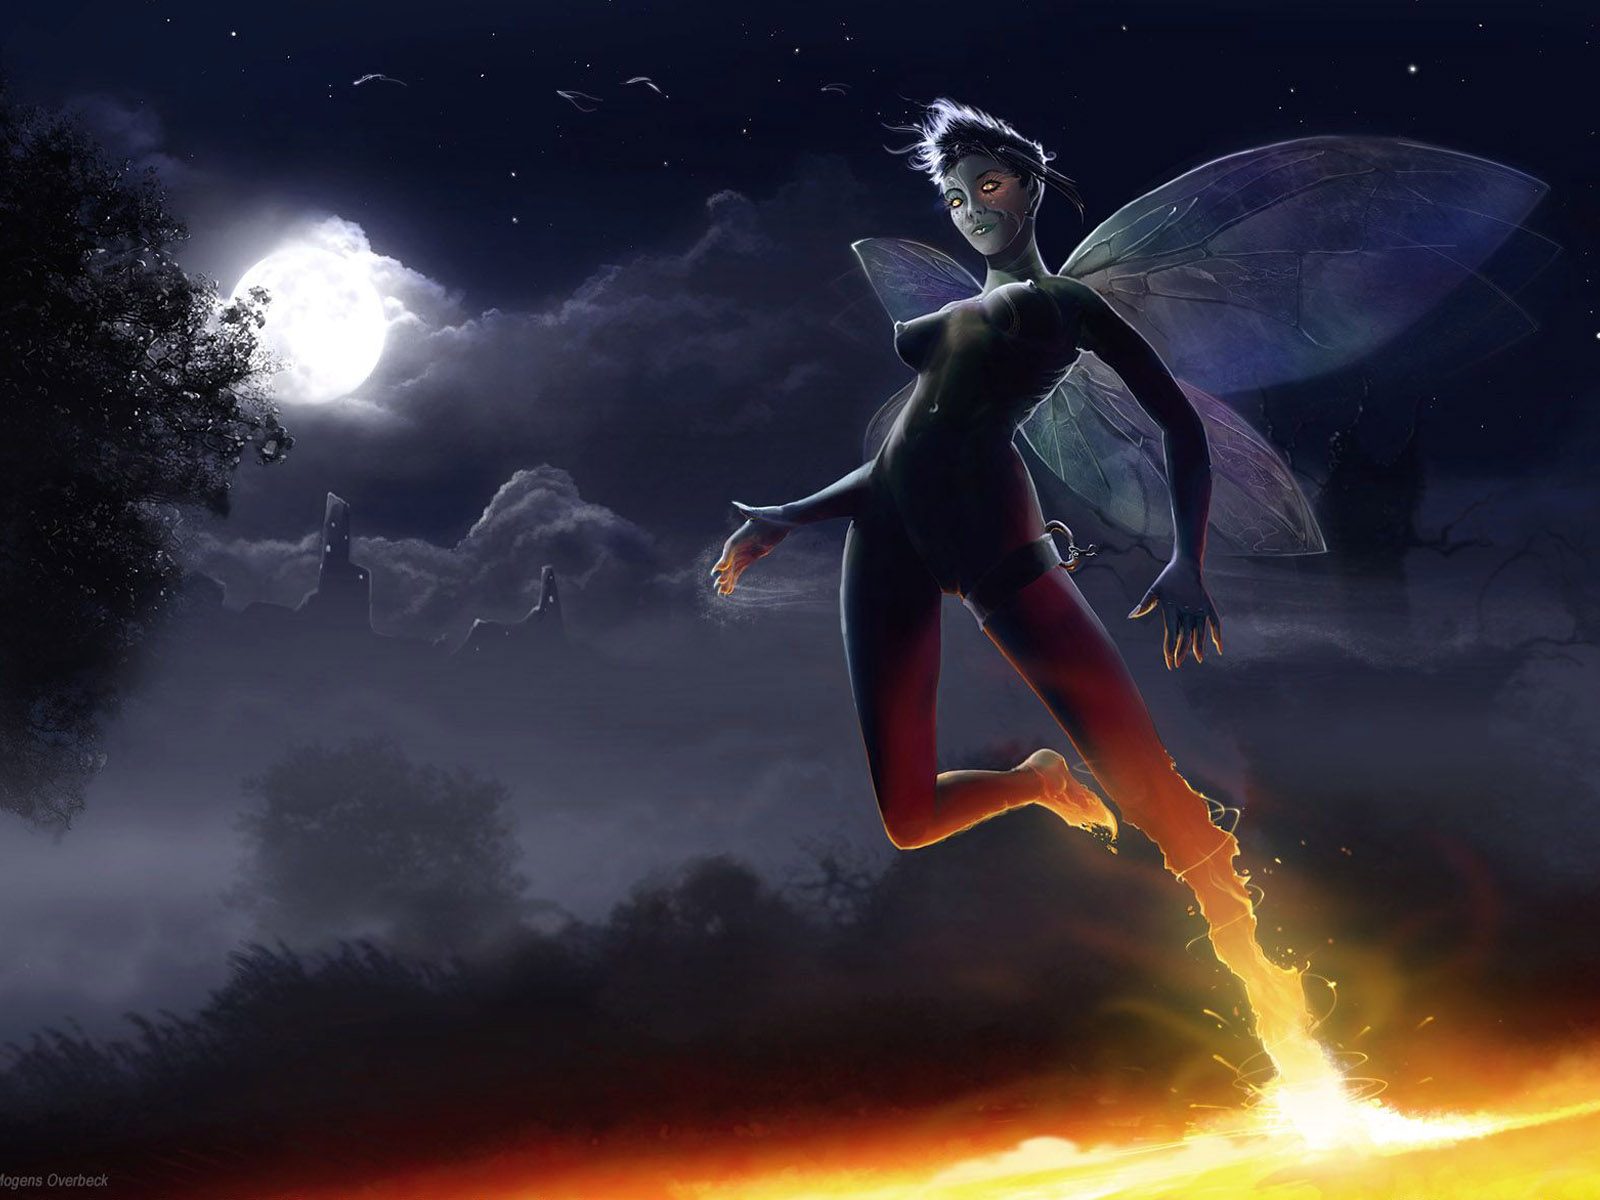 awesome hd wallpapers for pc,sky,cg artwork,fictional character,atmosphere,space